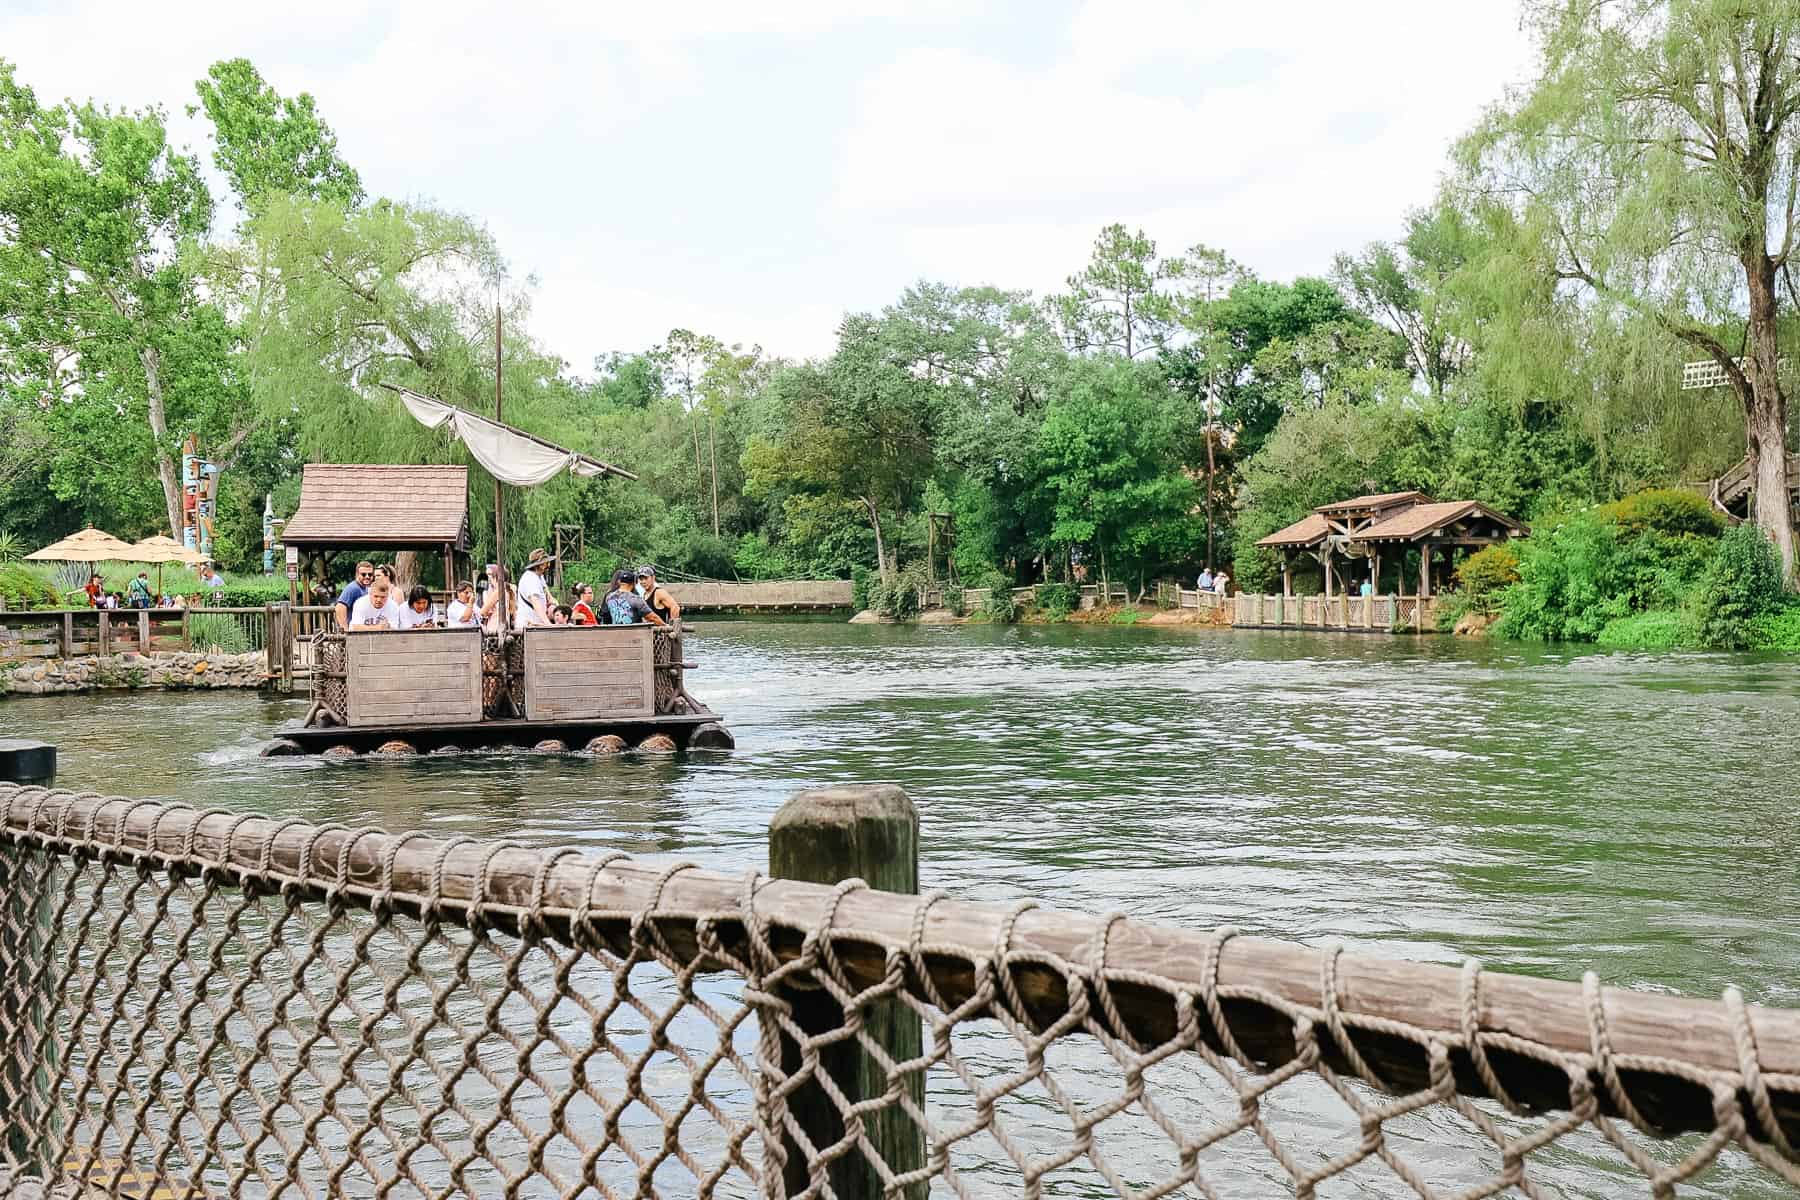 Guests riding a raft to Tom Sawyer Island. 